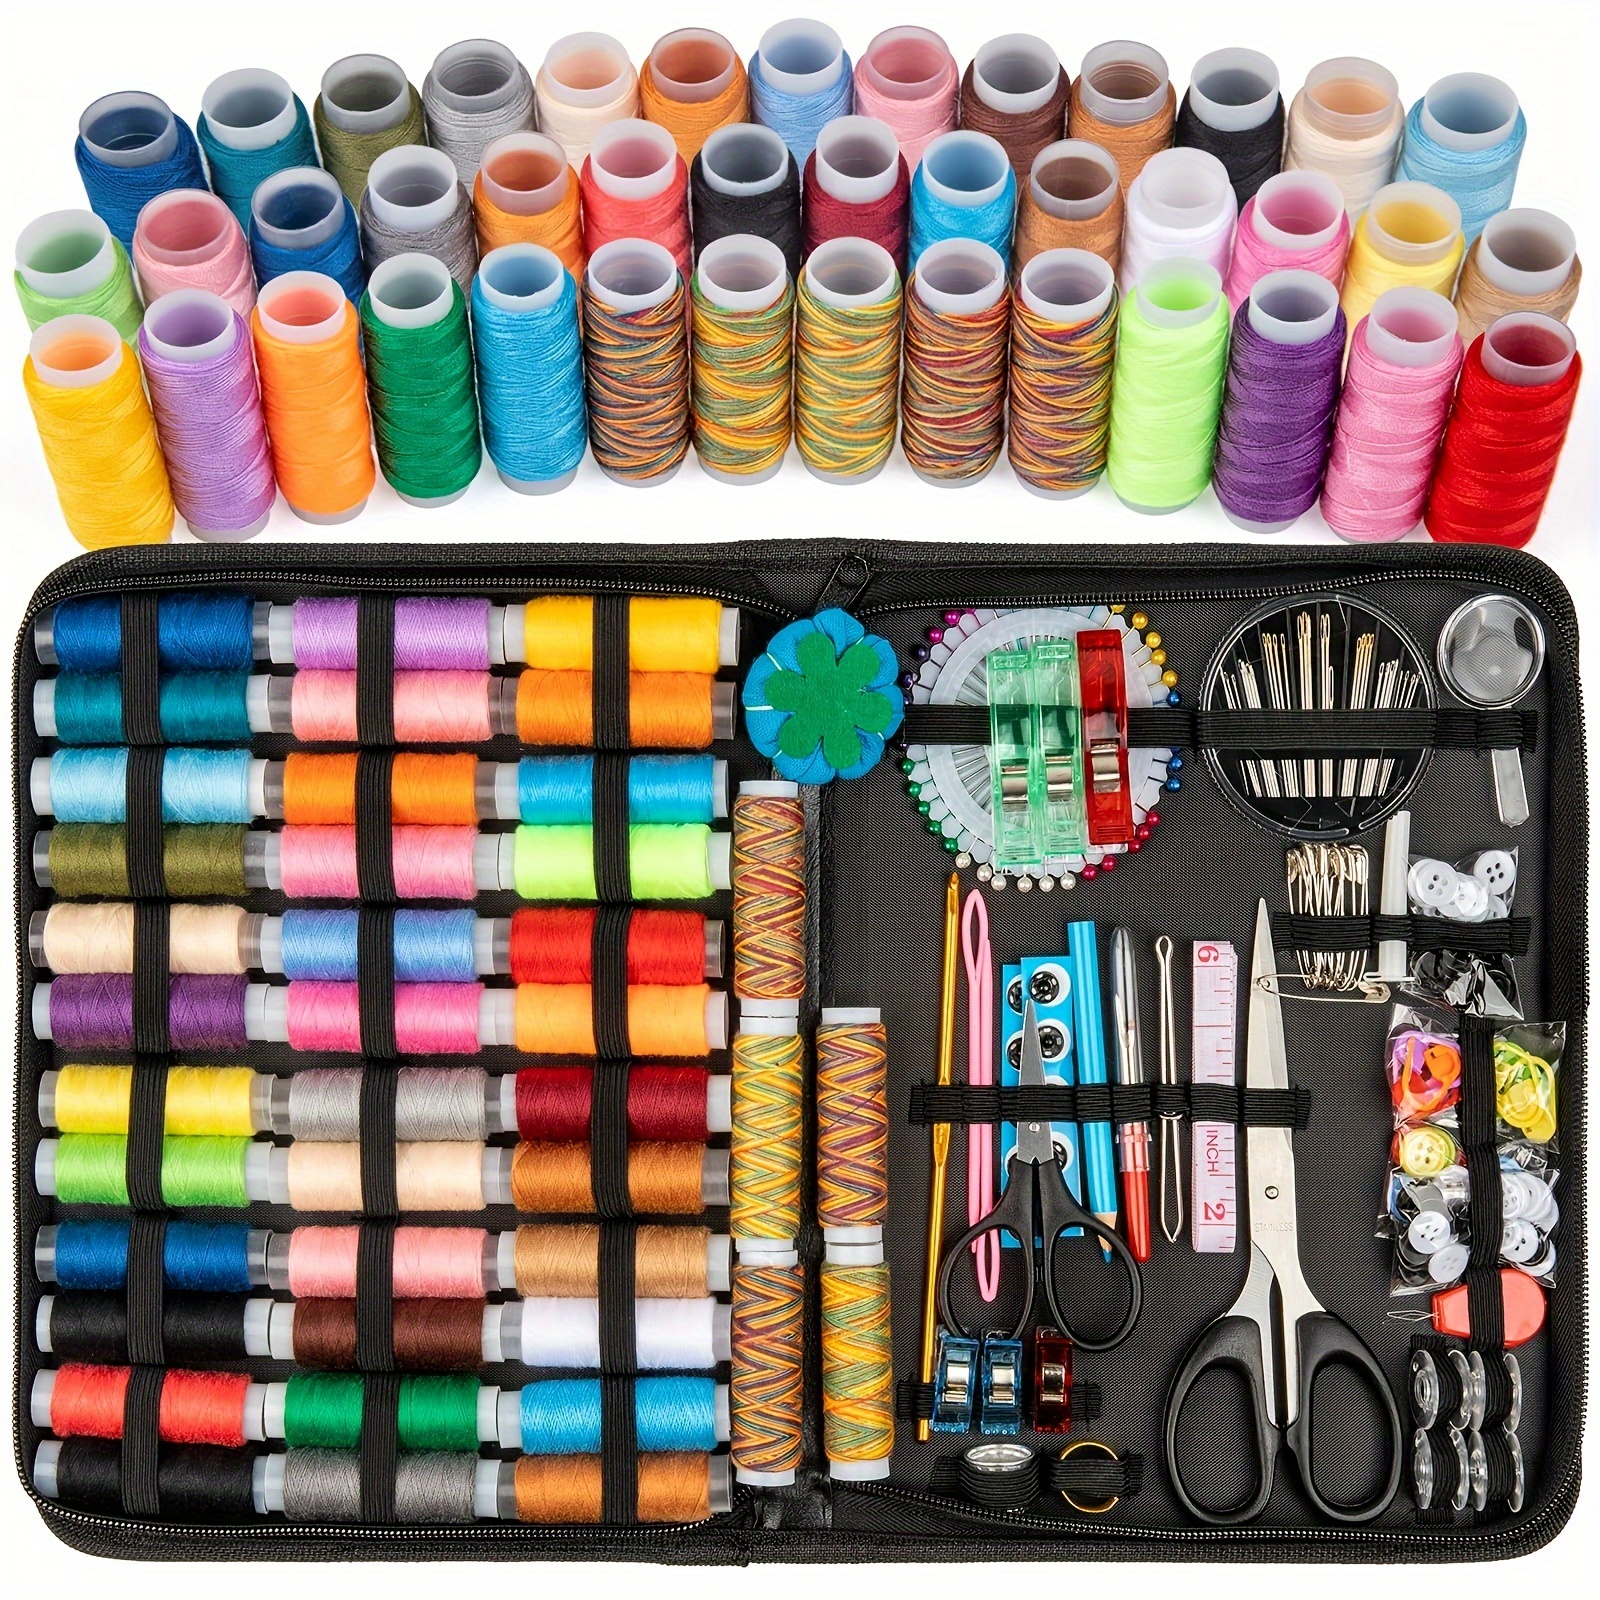 

206pcs/set Sewing Kit, Diy Sewing Supplies With Sewing Accessories, Portable Mini Sewing Kit For Beginner, And Emergency Clothing Fixes, With Premium Black Carrying Case